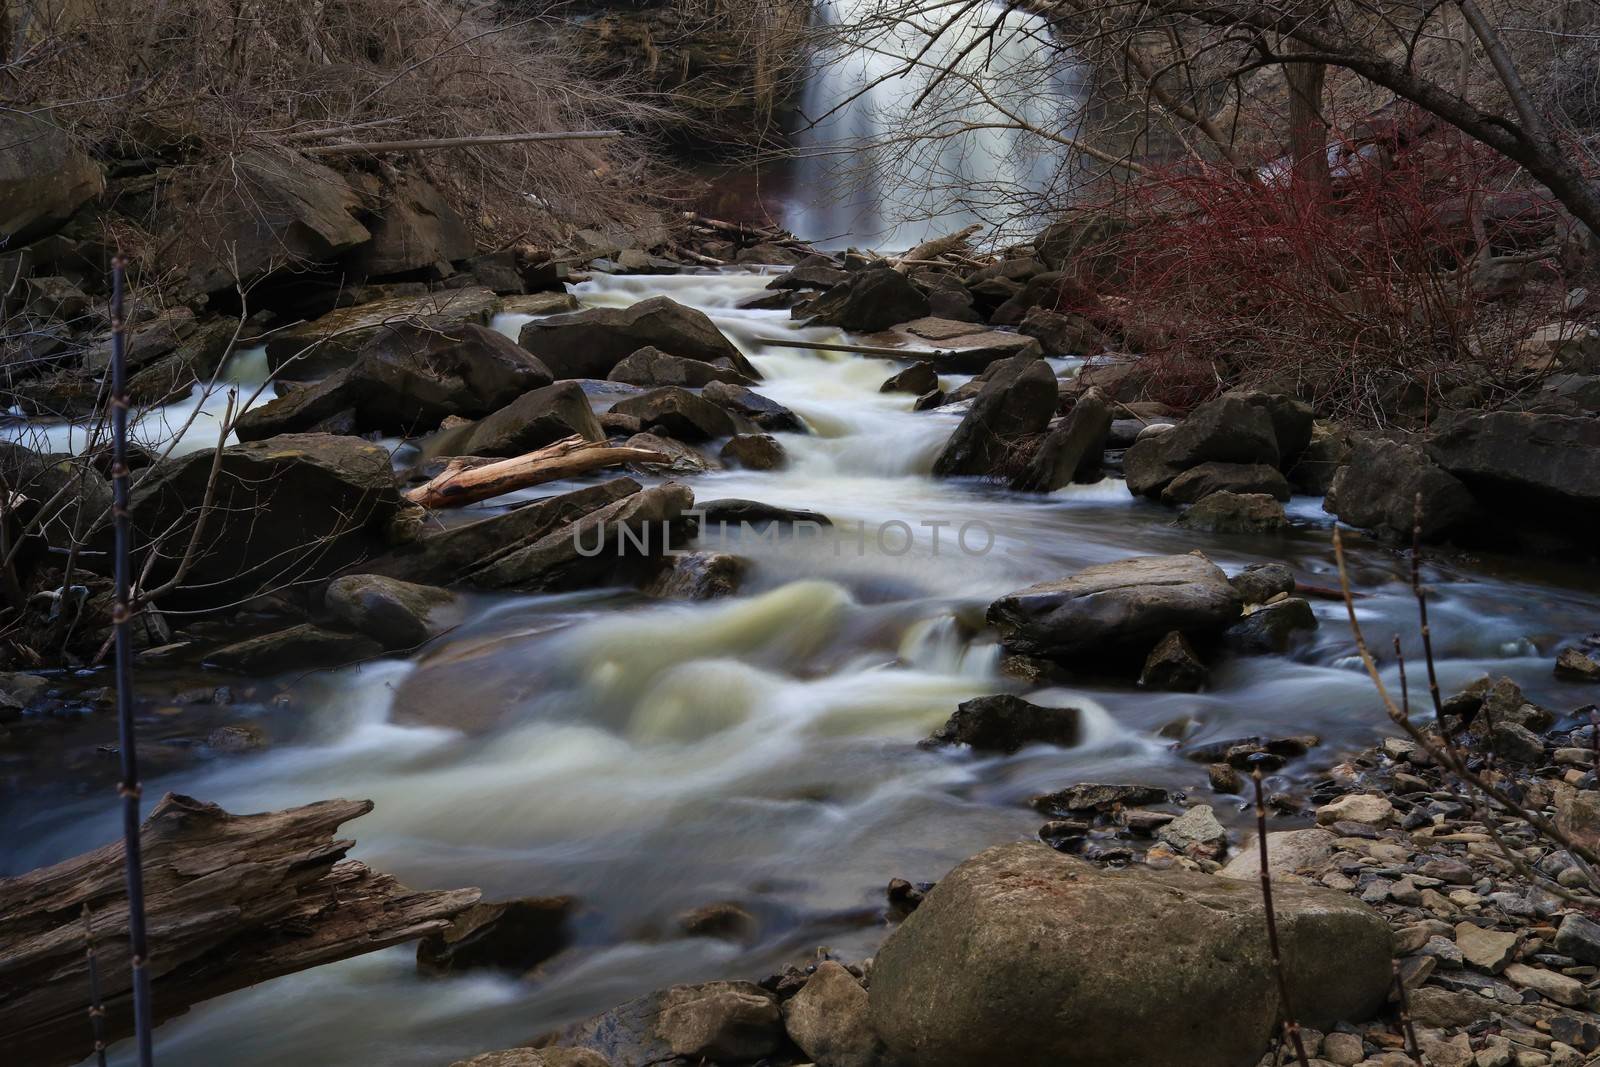 This photo was taken in Waterdown Ontario. The falls are located along the Bruce Trail.